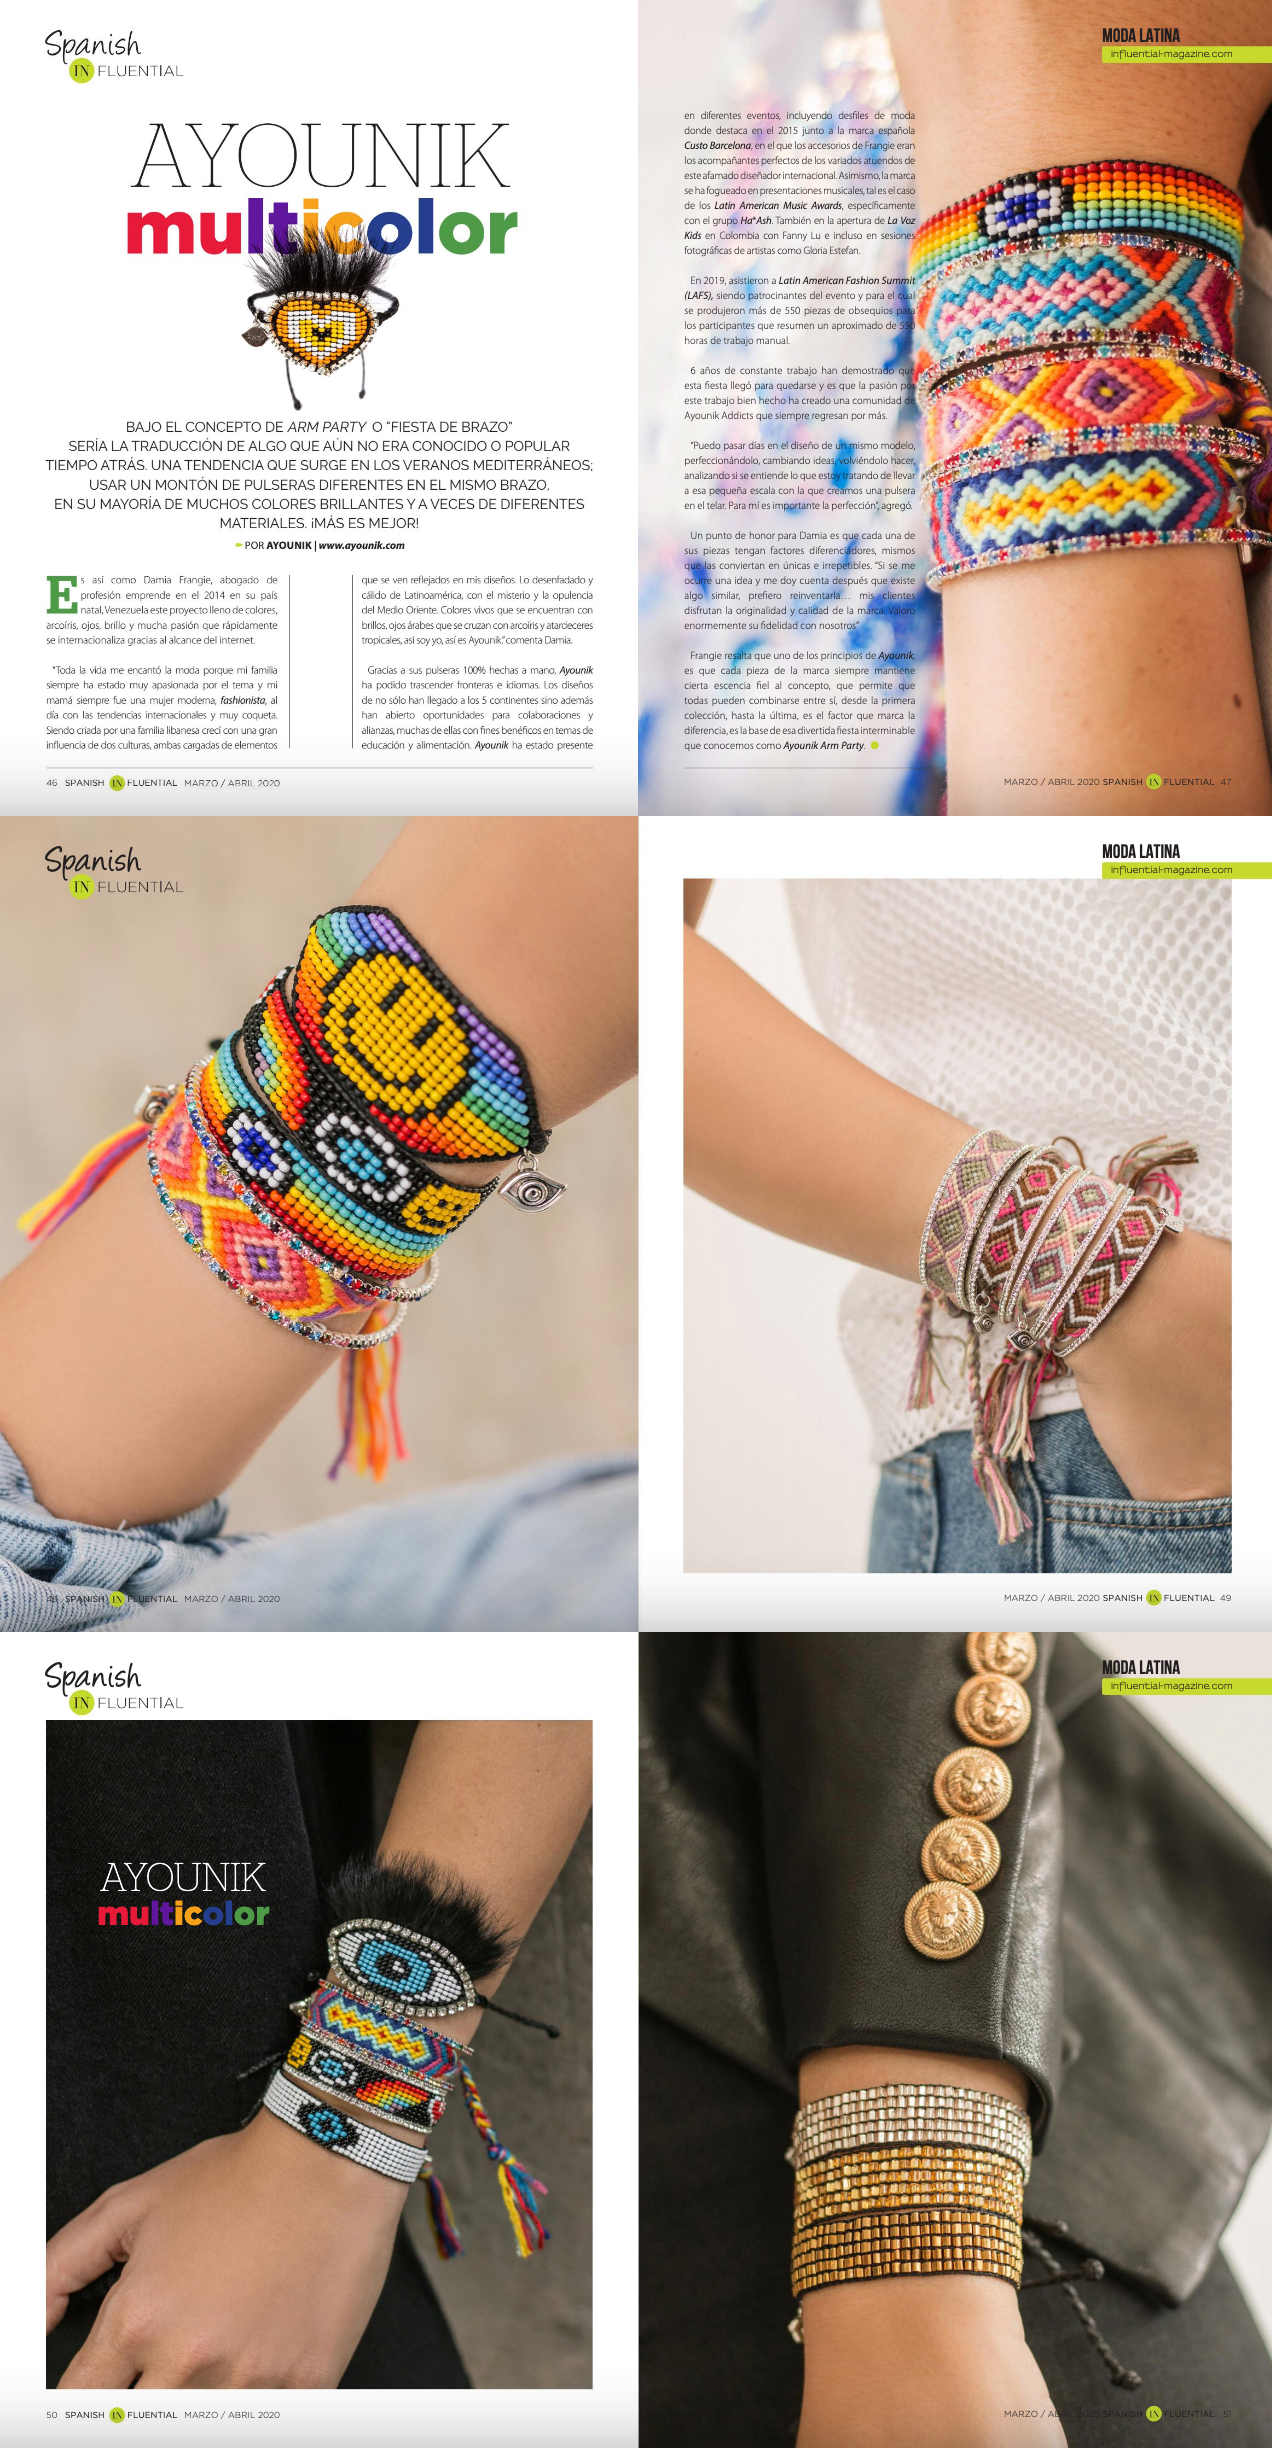 INFLUENTIAL MAGAZINE, SPANISH INFLUENTIAL PAGES 46-50, MARCH 2020. READ HERE